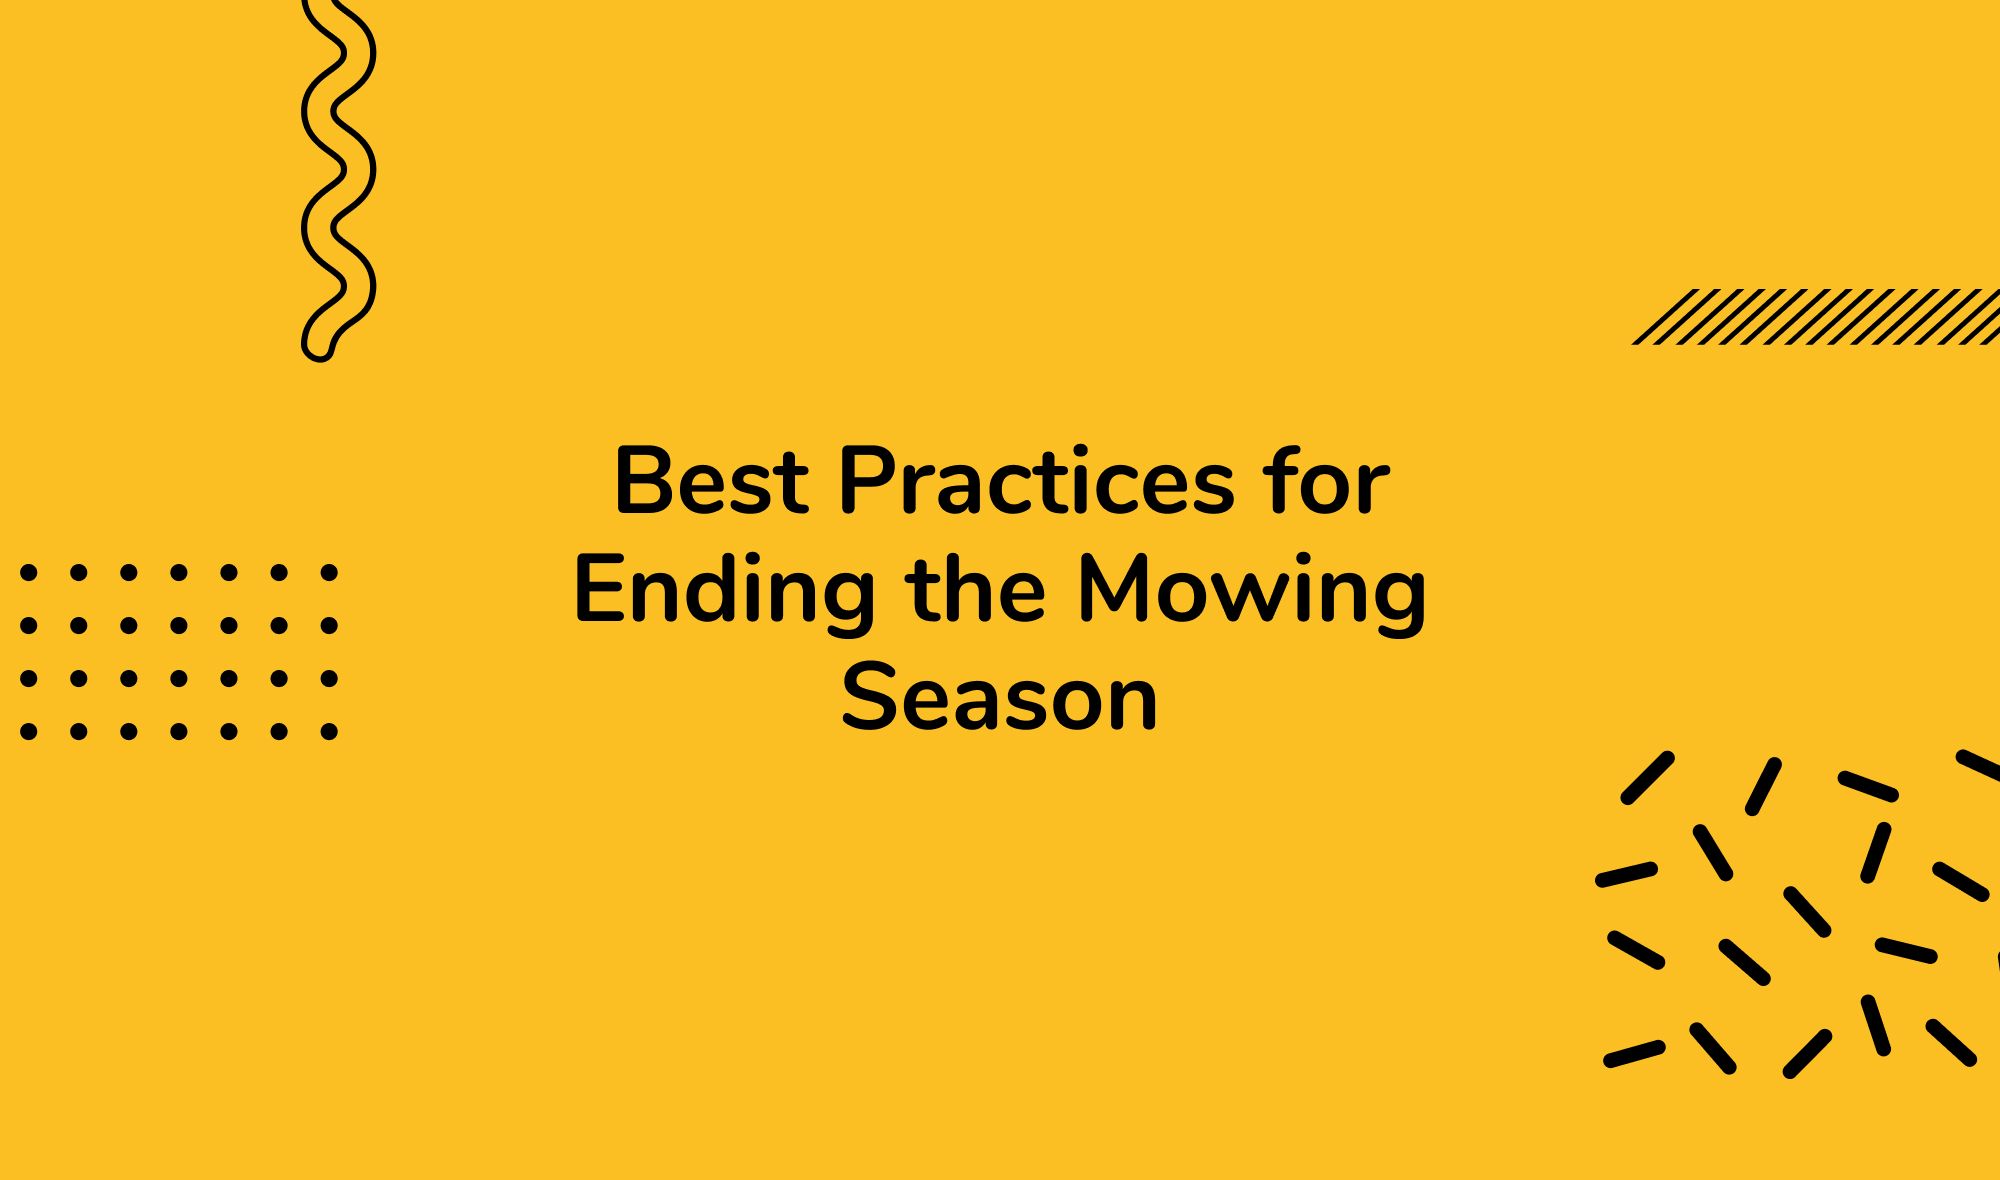 Best Practices for Ending the Mowing Season